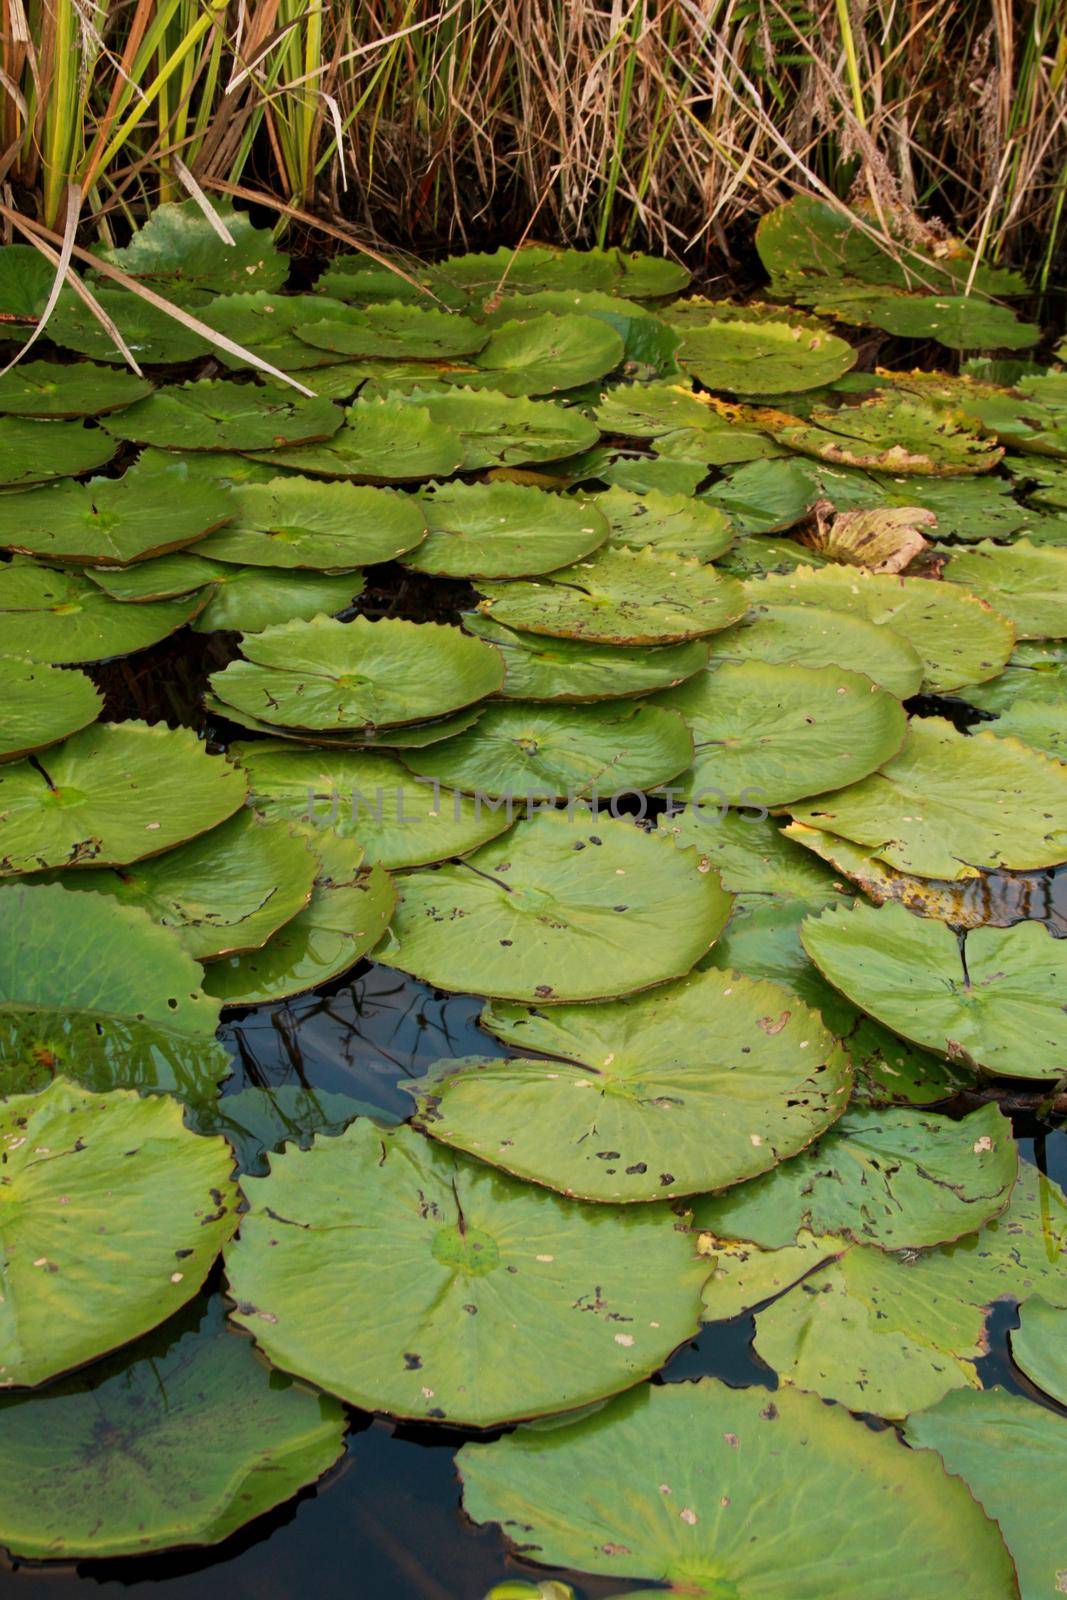 conde, bahia / brazil - september 7, 2012: Vitoria regia aquatic plant is seen in a pond in the city of Conde.